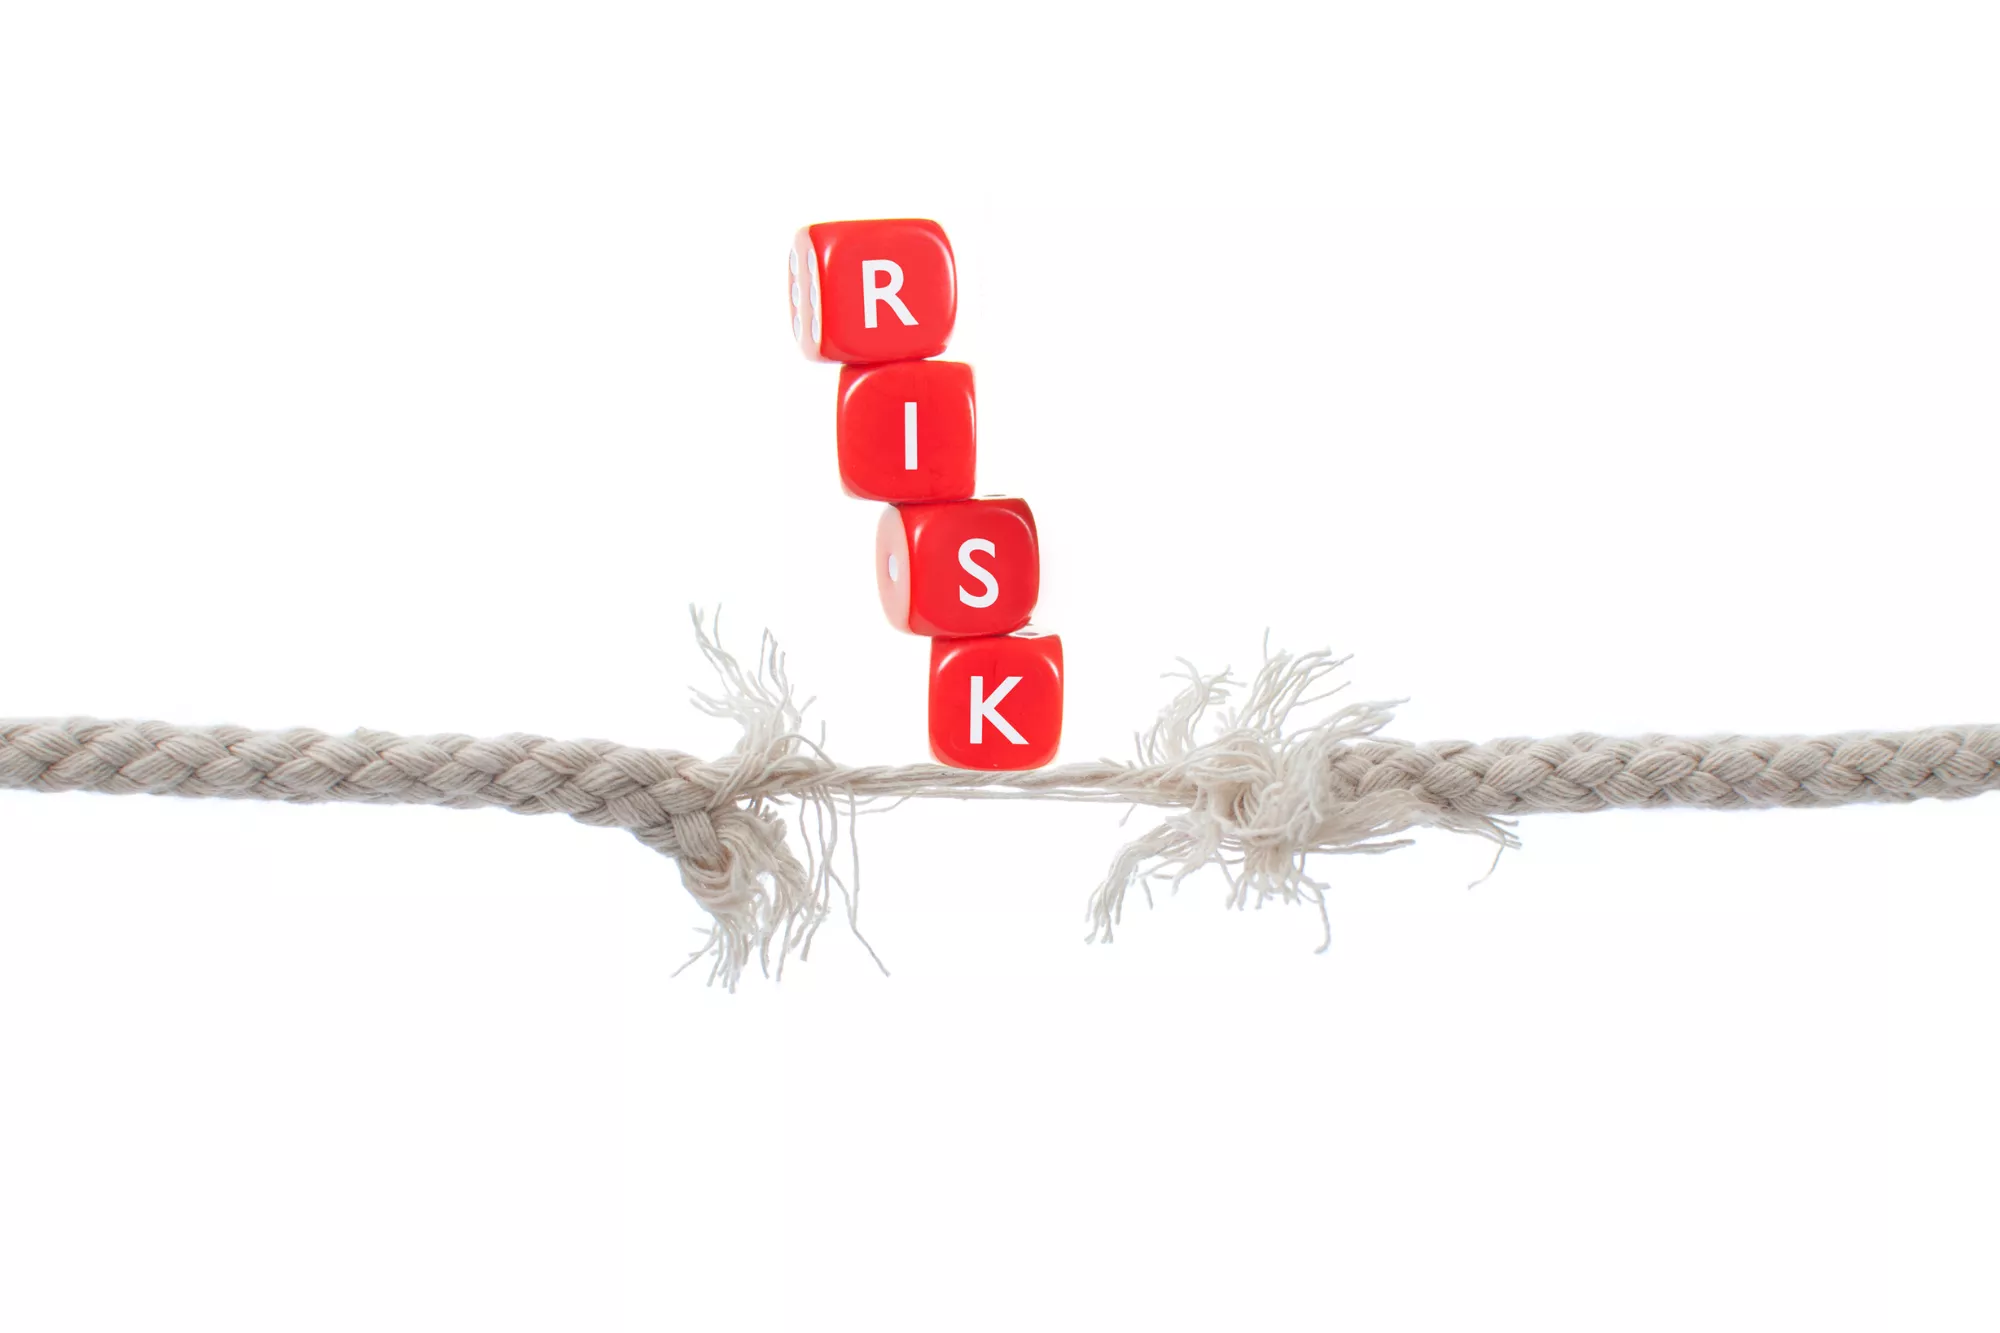 Two ropes balancing red blocks that spell out 'risk' to represent visa high-risk mcc codes.